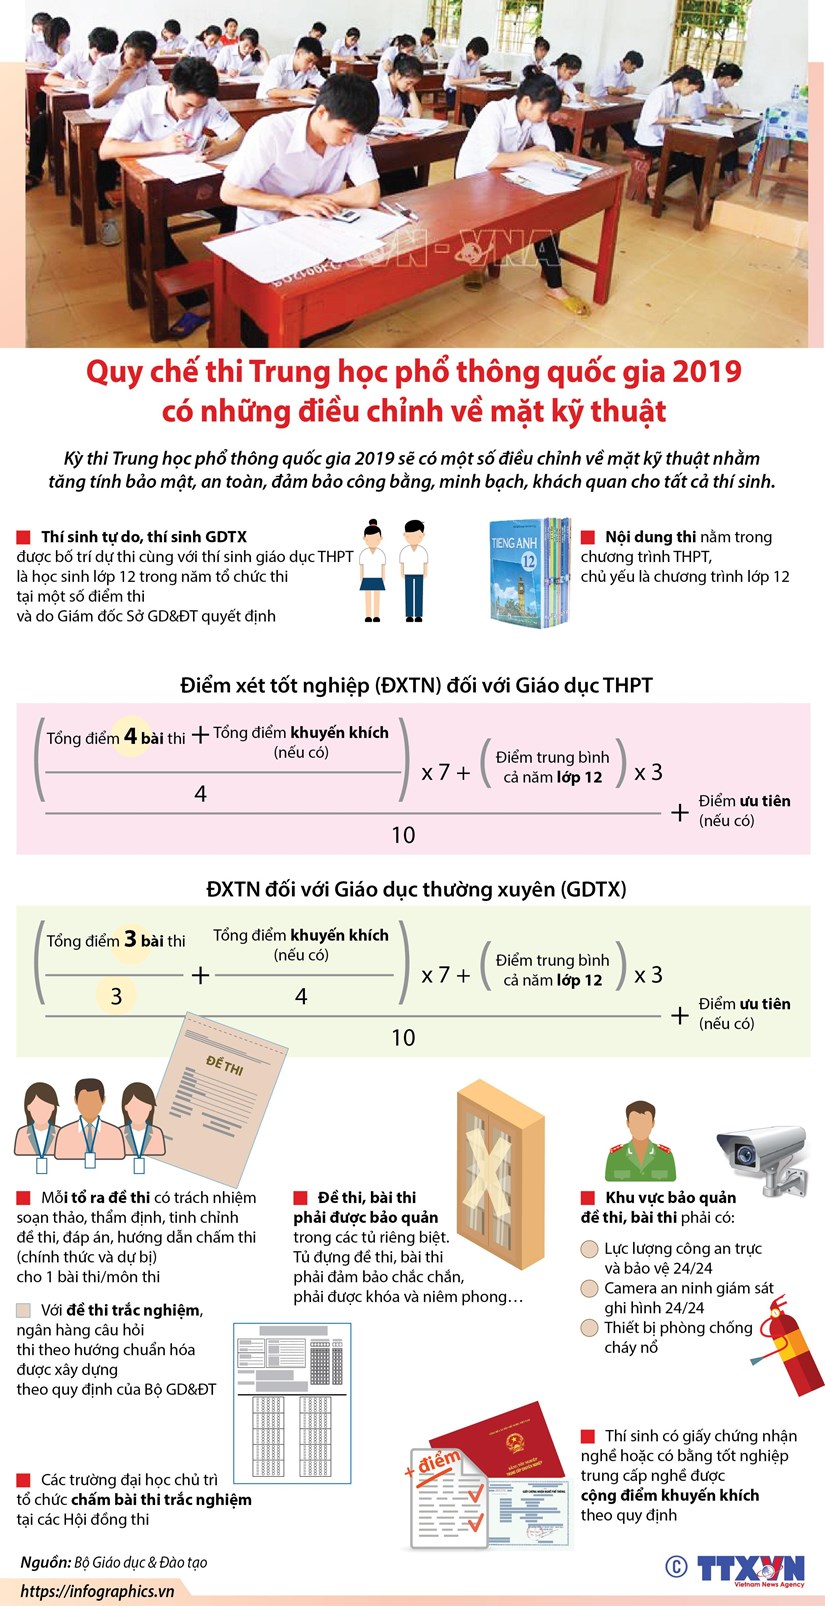 [Infographics] Quy che thi THPT quoc gia 2019 dieu chinh ve ky thuat hinh anh 1